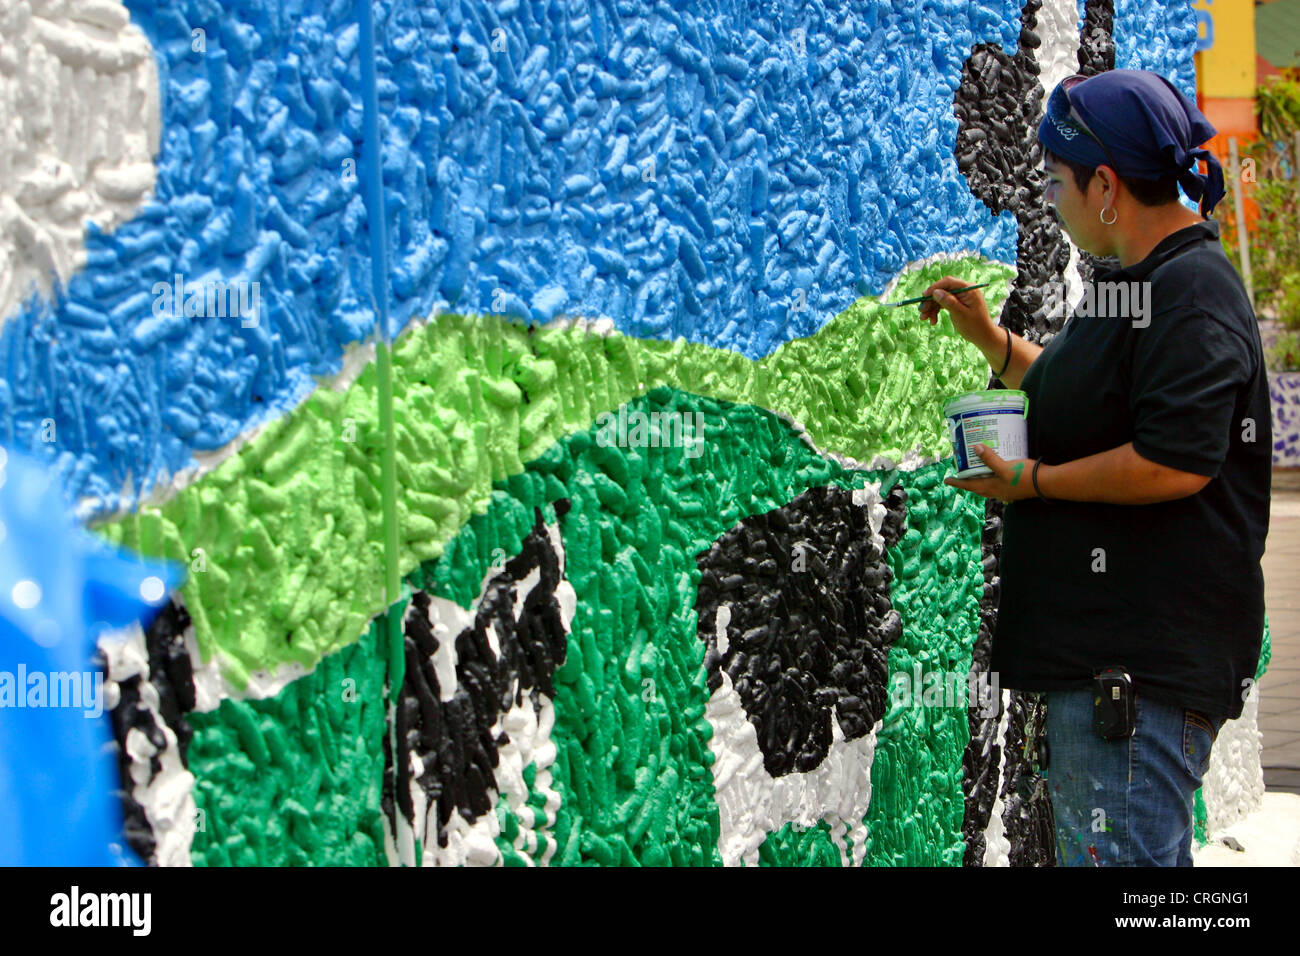 woman painting wall with landscape, Netherlands Antilles, Curacao, Punda, Willemstad Stock Photo